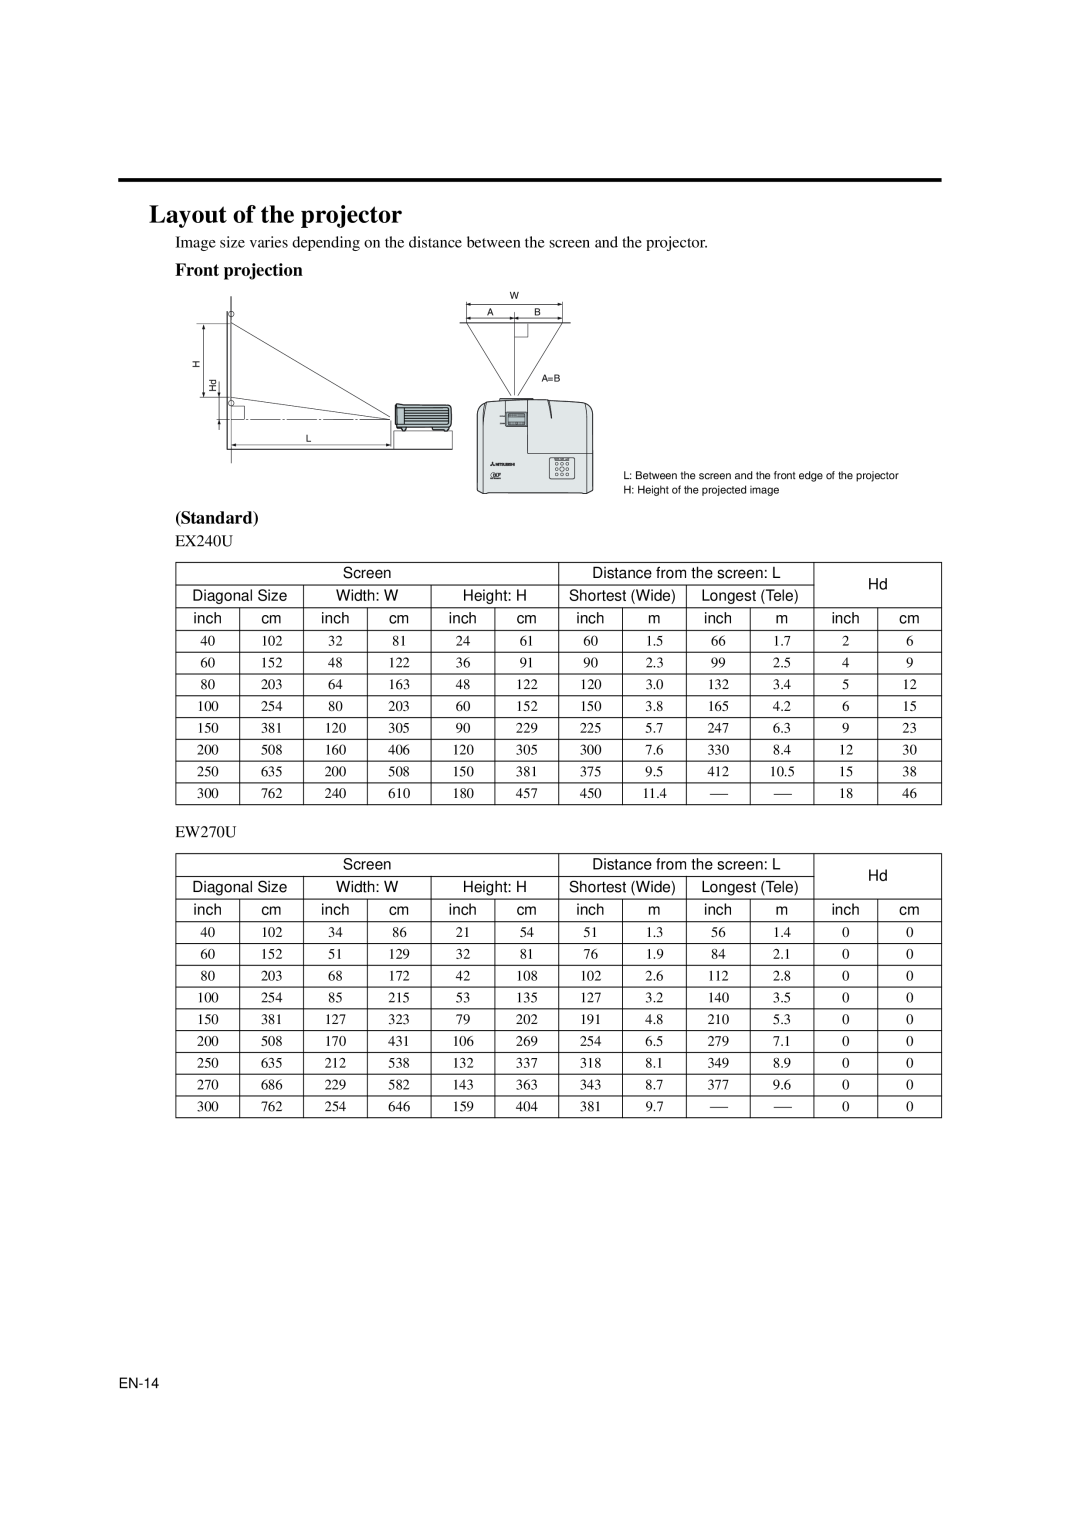 Mitsubishi Electronics EW270U user manual Layout of the projector, Front projection, Standard 